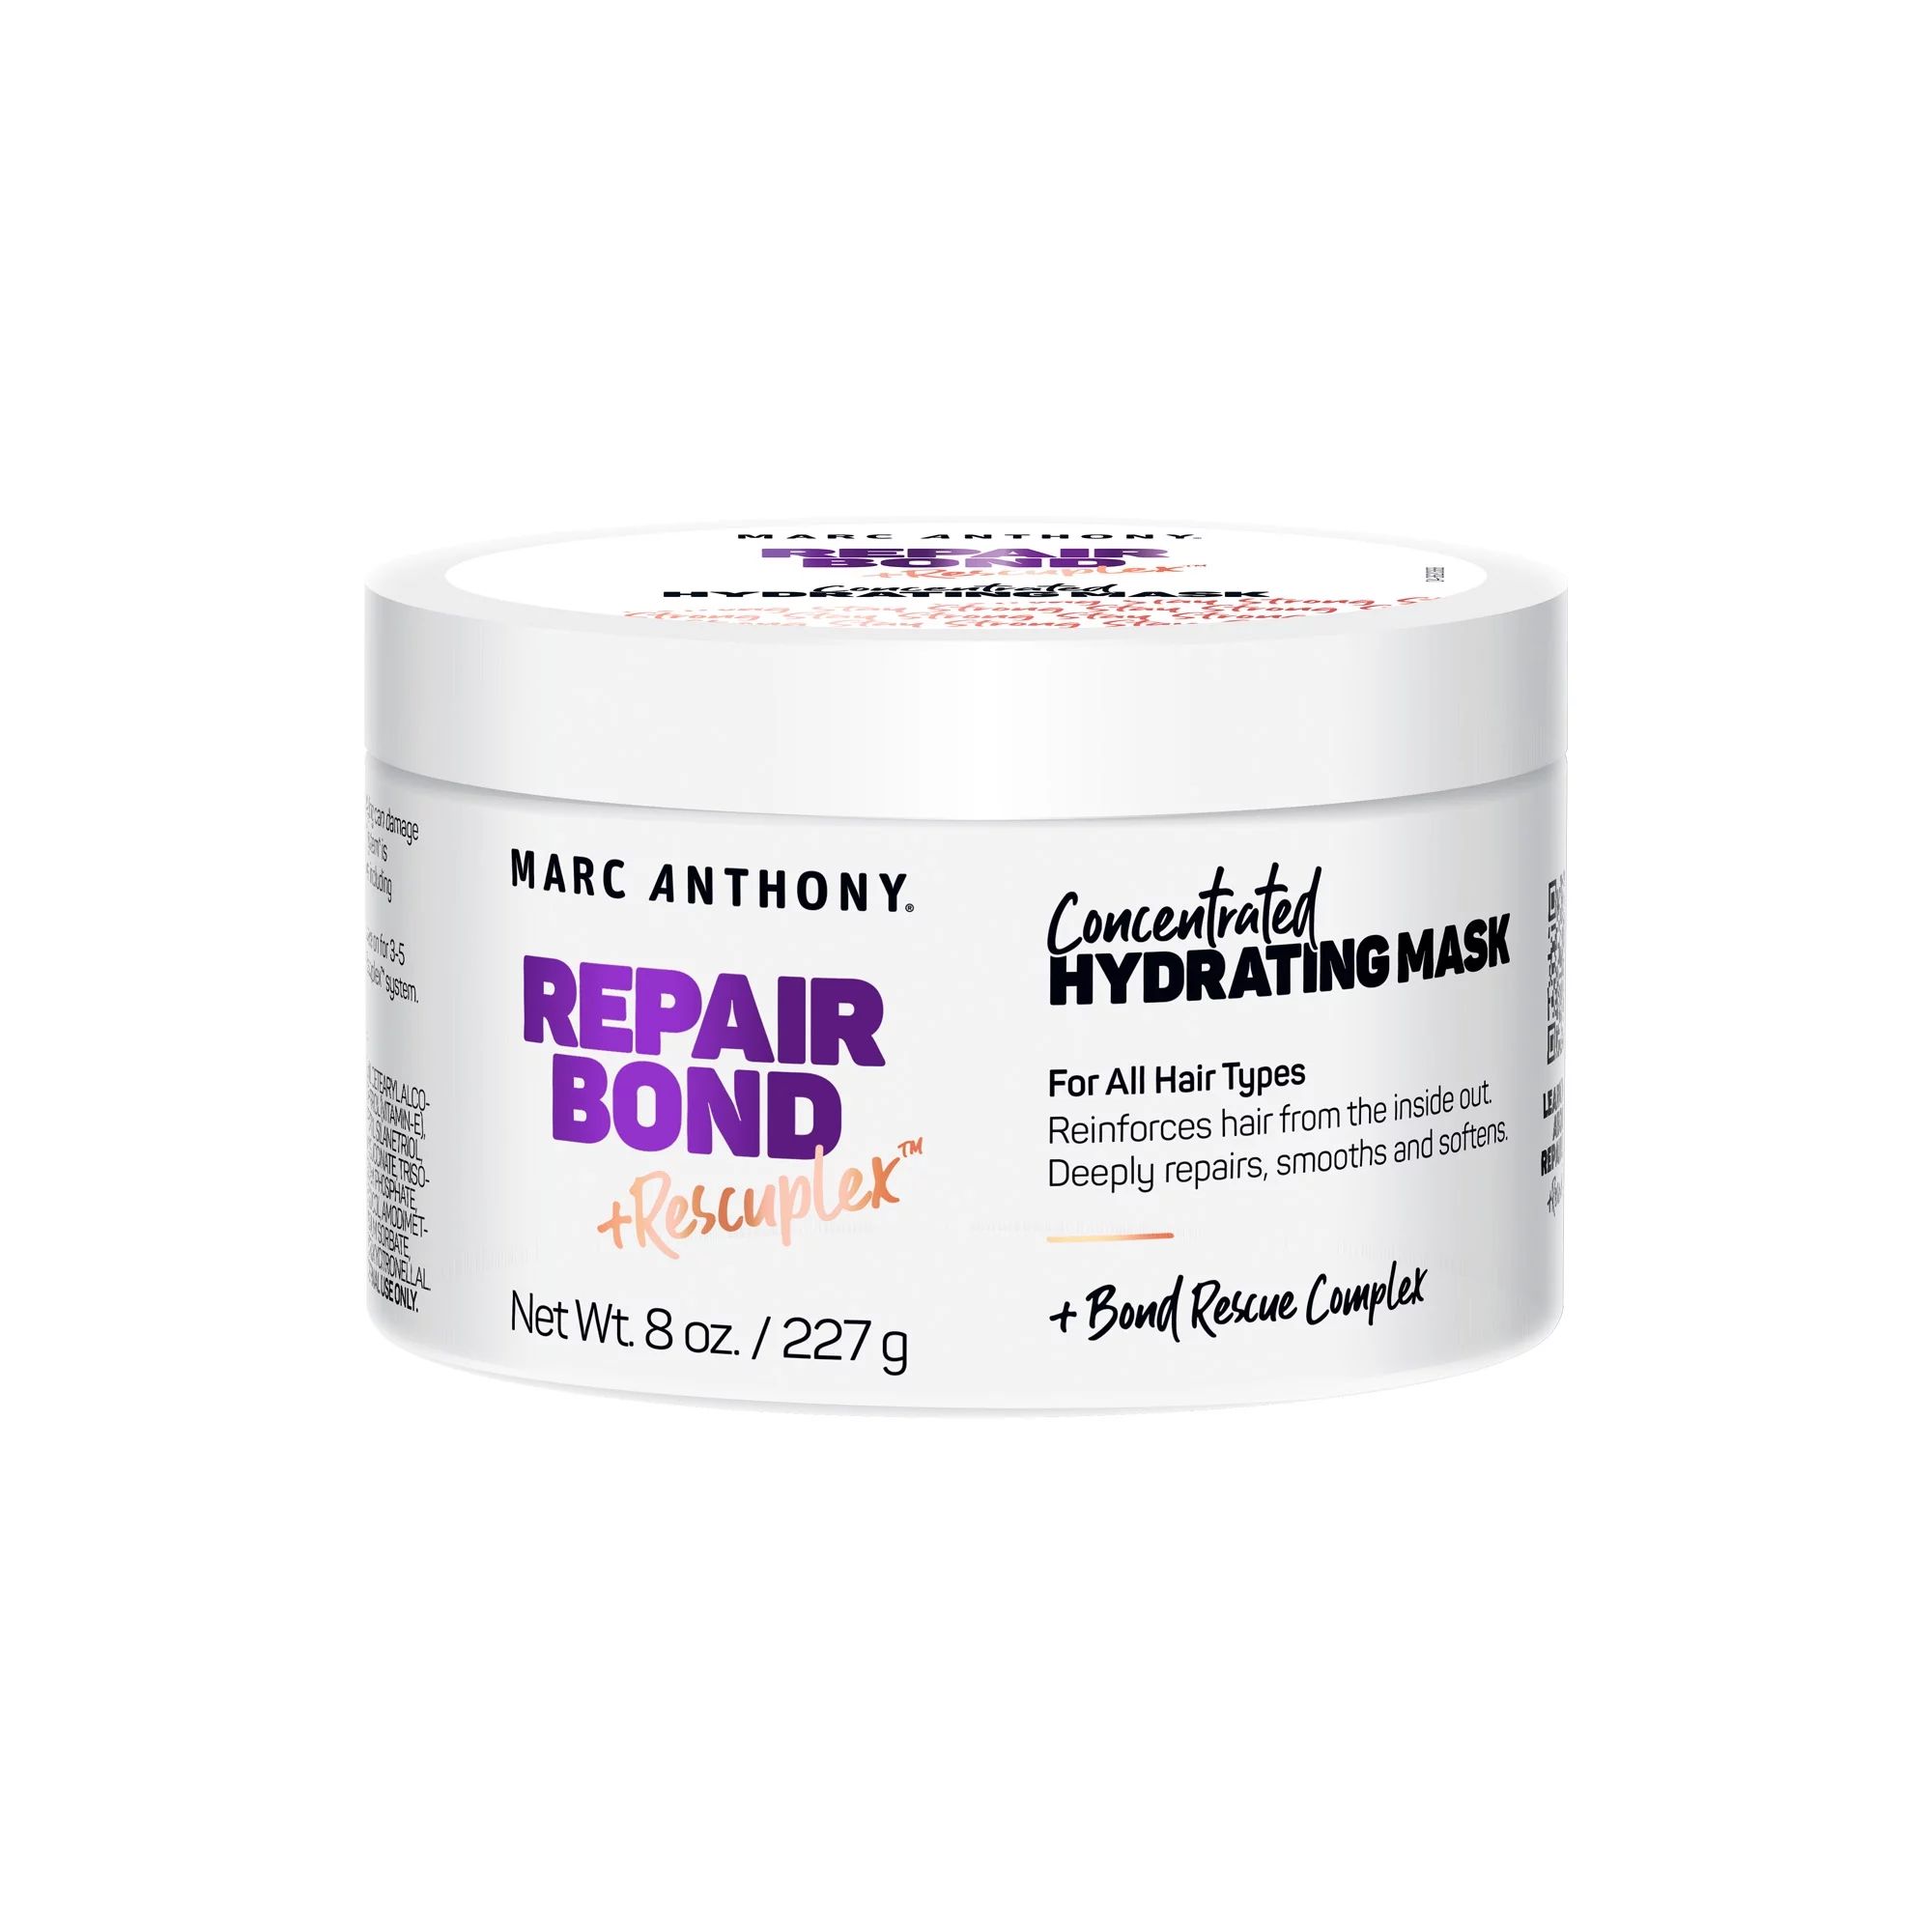 Marc Anthony Repair Bond Plus Rescuplex Concentrated Hydrating Hair Mask, 8 ounces | Walmart (US)